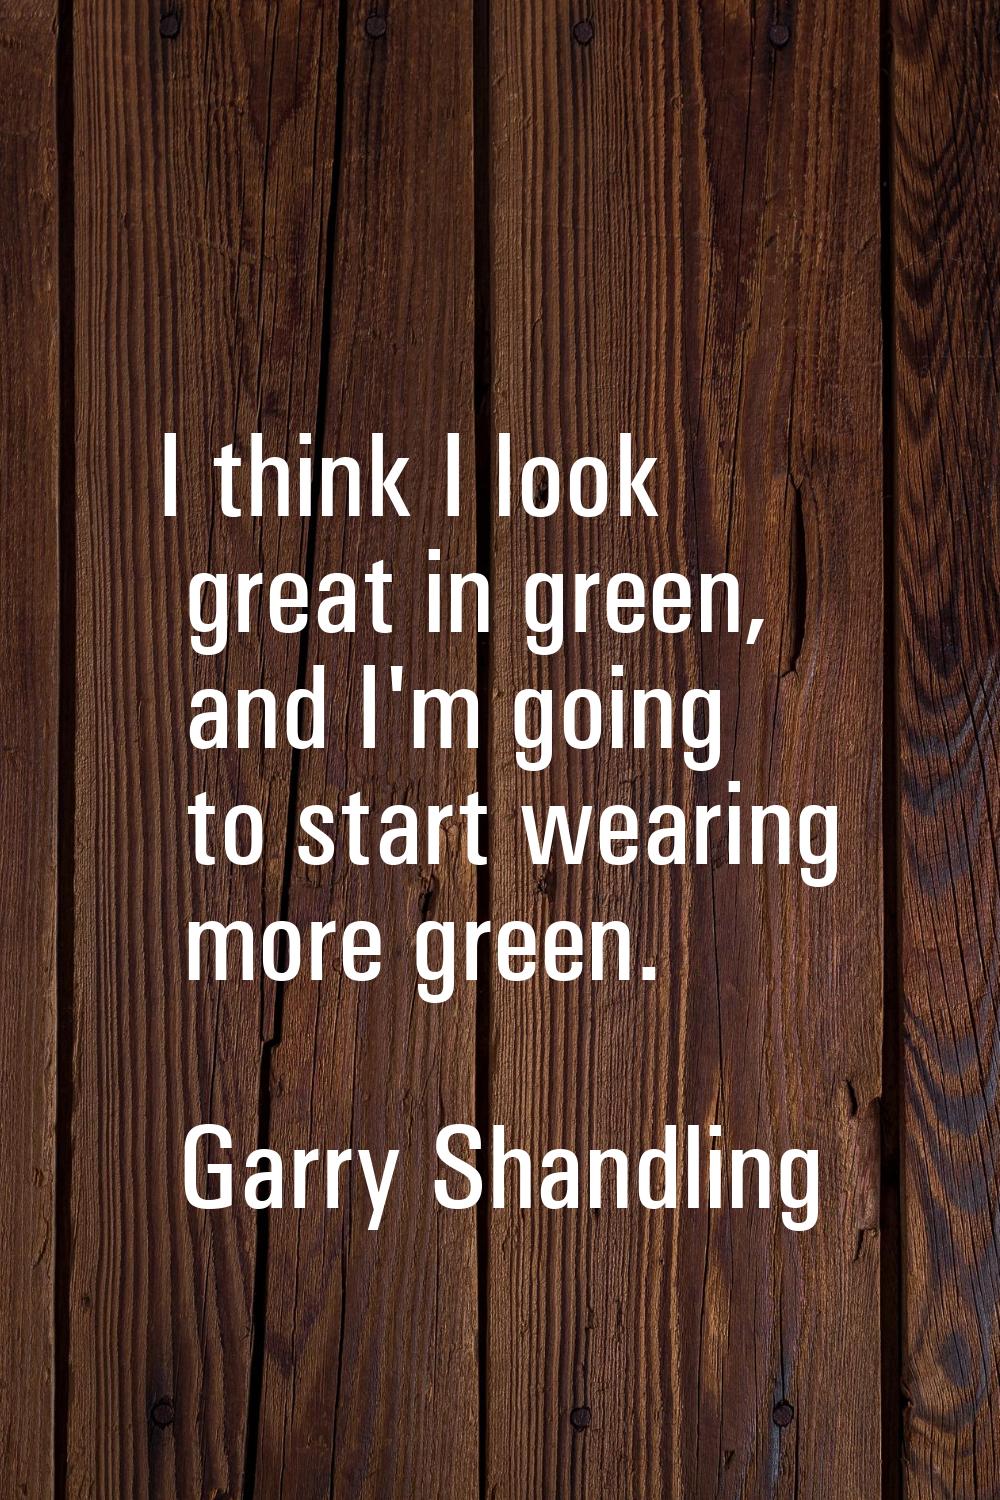 I think I look great in green, and I'm going to start wearing more green.